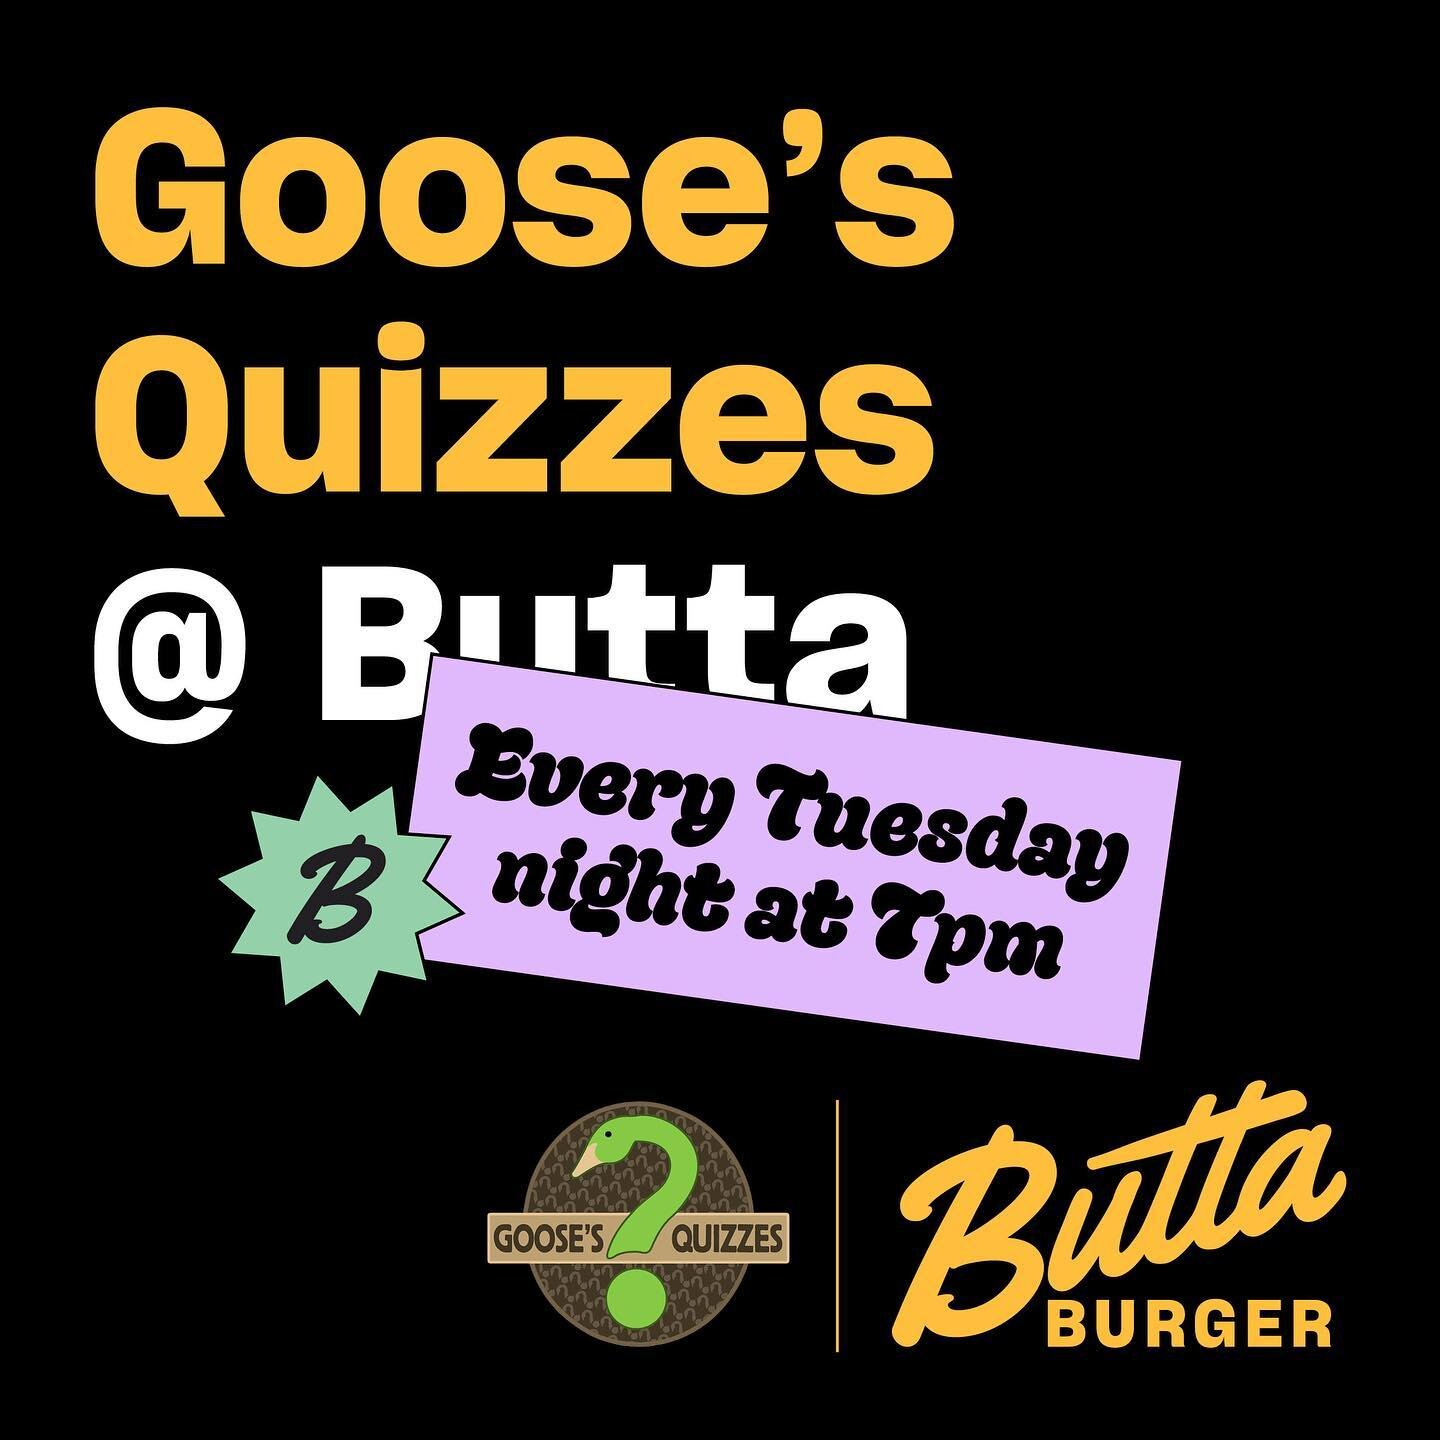 Goose&rsquo;s Quizzes - 7pm every Tuesday at Butta Quartermile 🤔

We&rsquo;re delighted to announce that @goosesquizzes will be running from Butta Burger Quartermile, every Tuesday at 7pm, starting on 13th September.

Every week, prizes will include